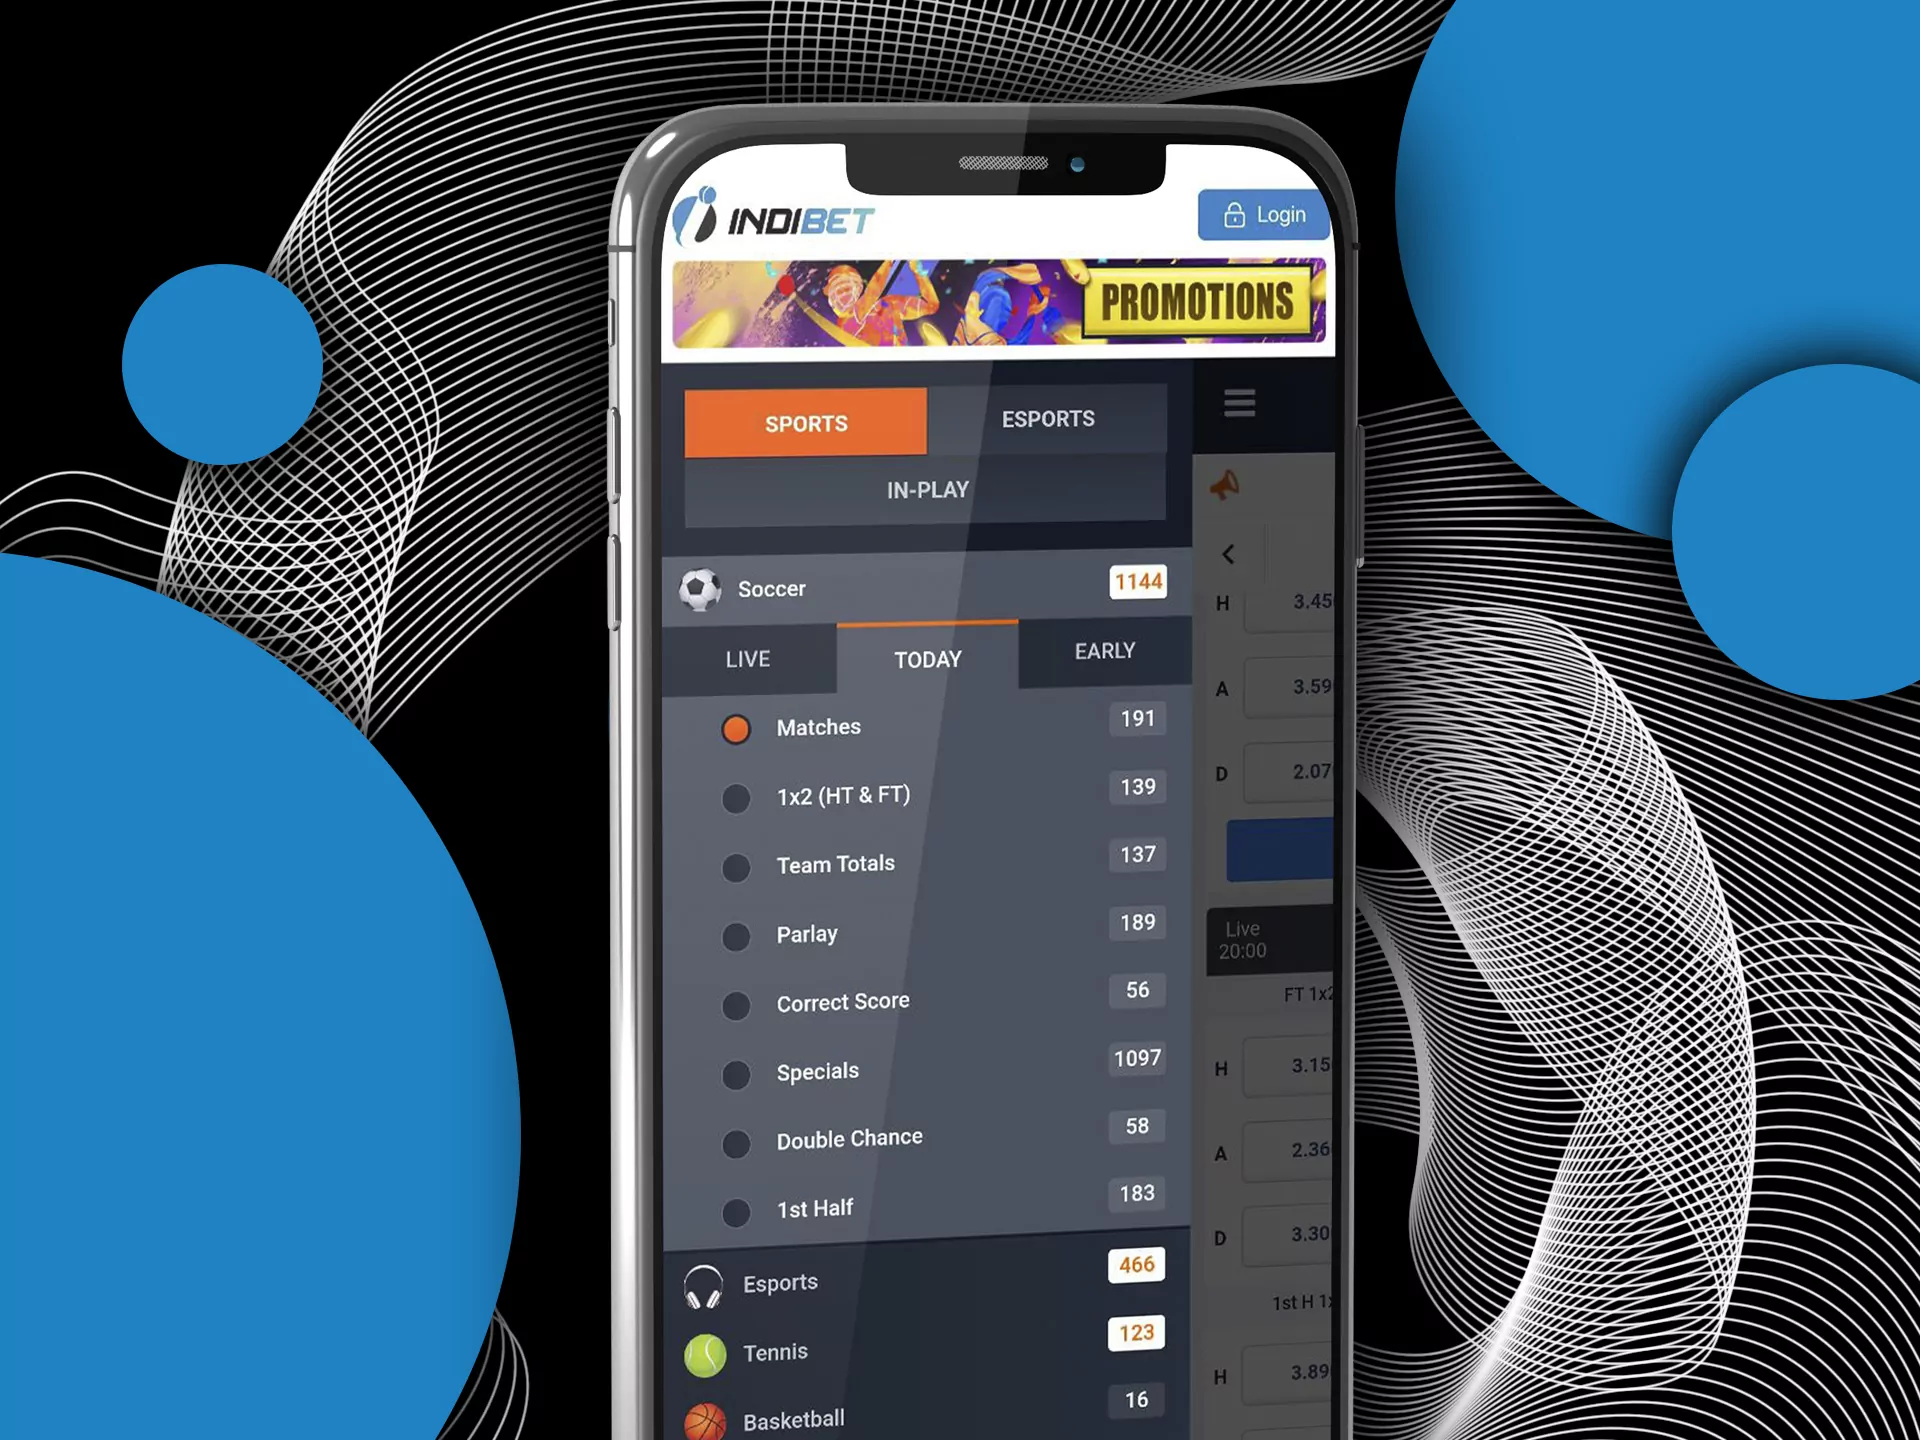 Indibet mobile app was designed to be a convenient and pleasant betting tool.